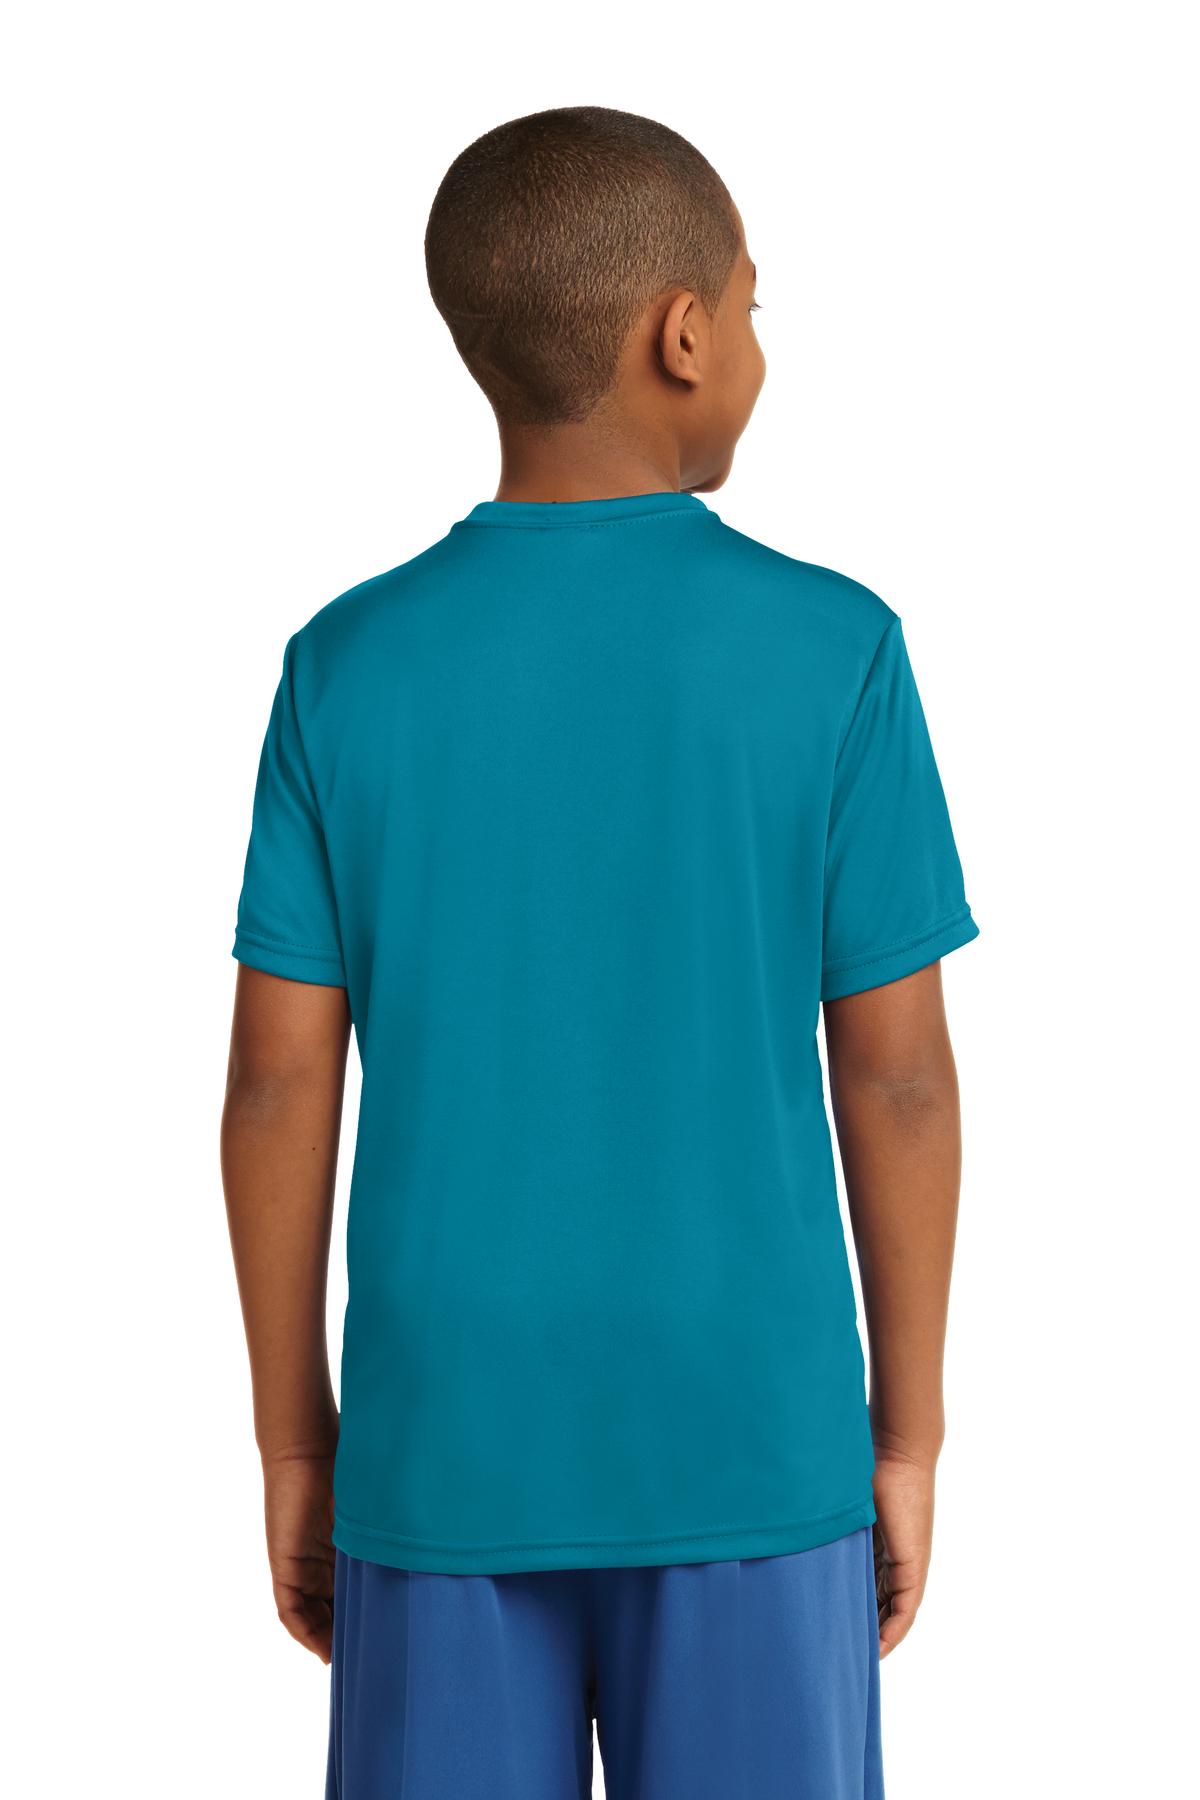 Sport-Tek® Youth PosiCharge® Competitor™ Tee. YST350 [Tropic Blue] - DFW Impression